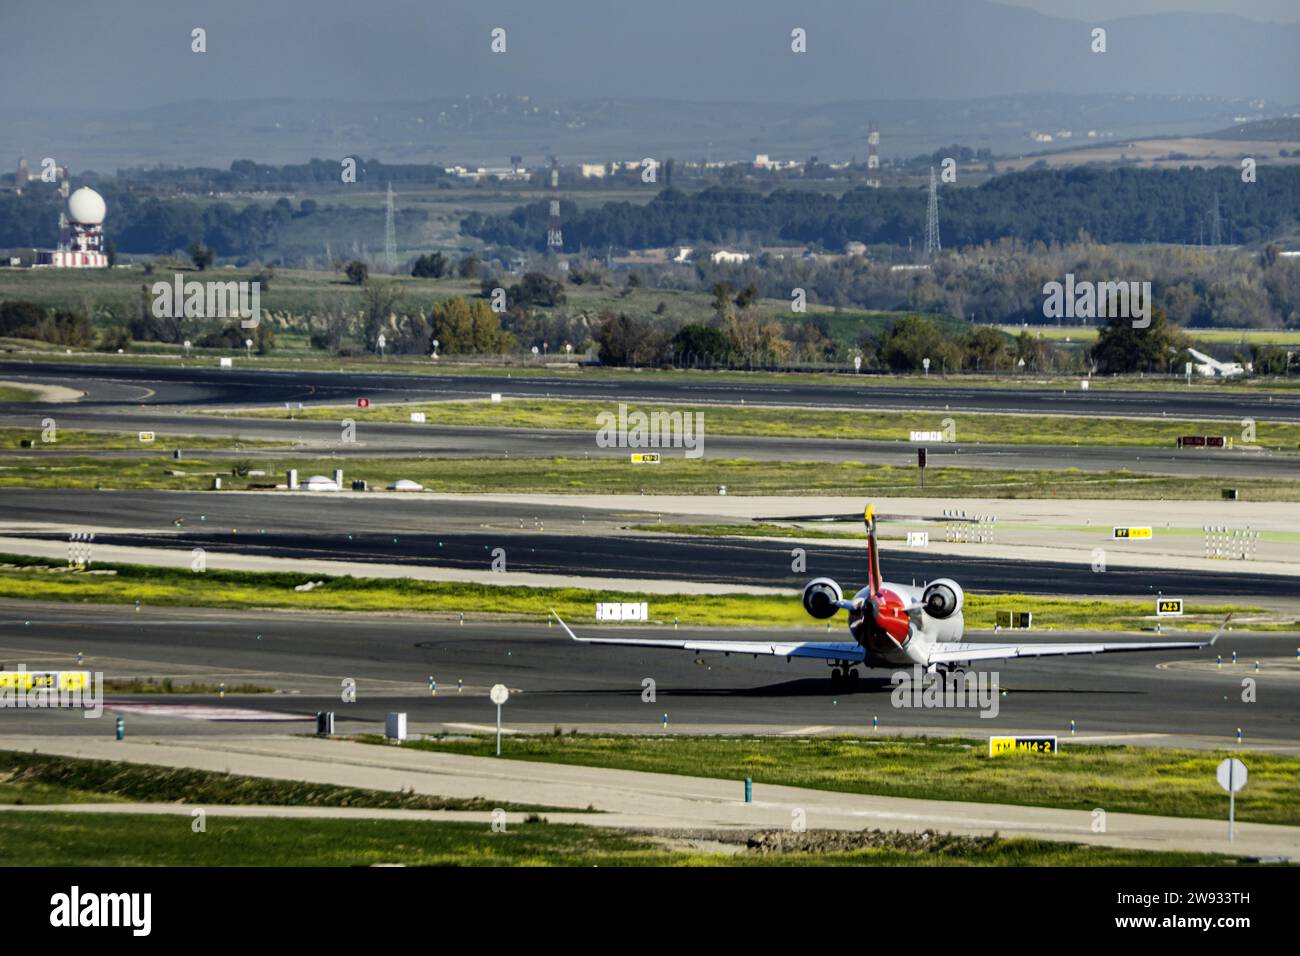 A jet plane intended for regional travel ready to approach the take-off runway Stock Photo